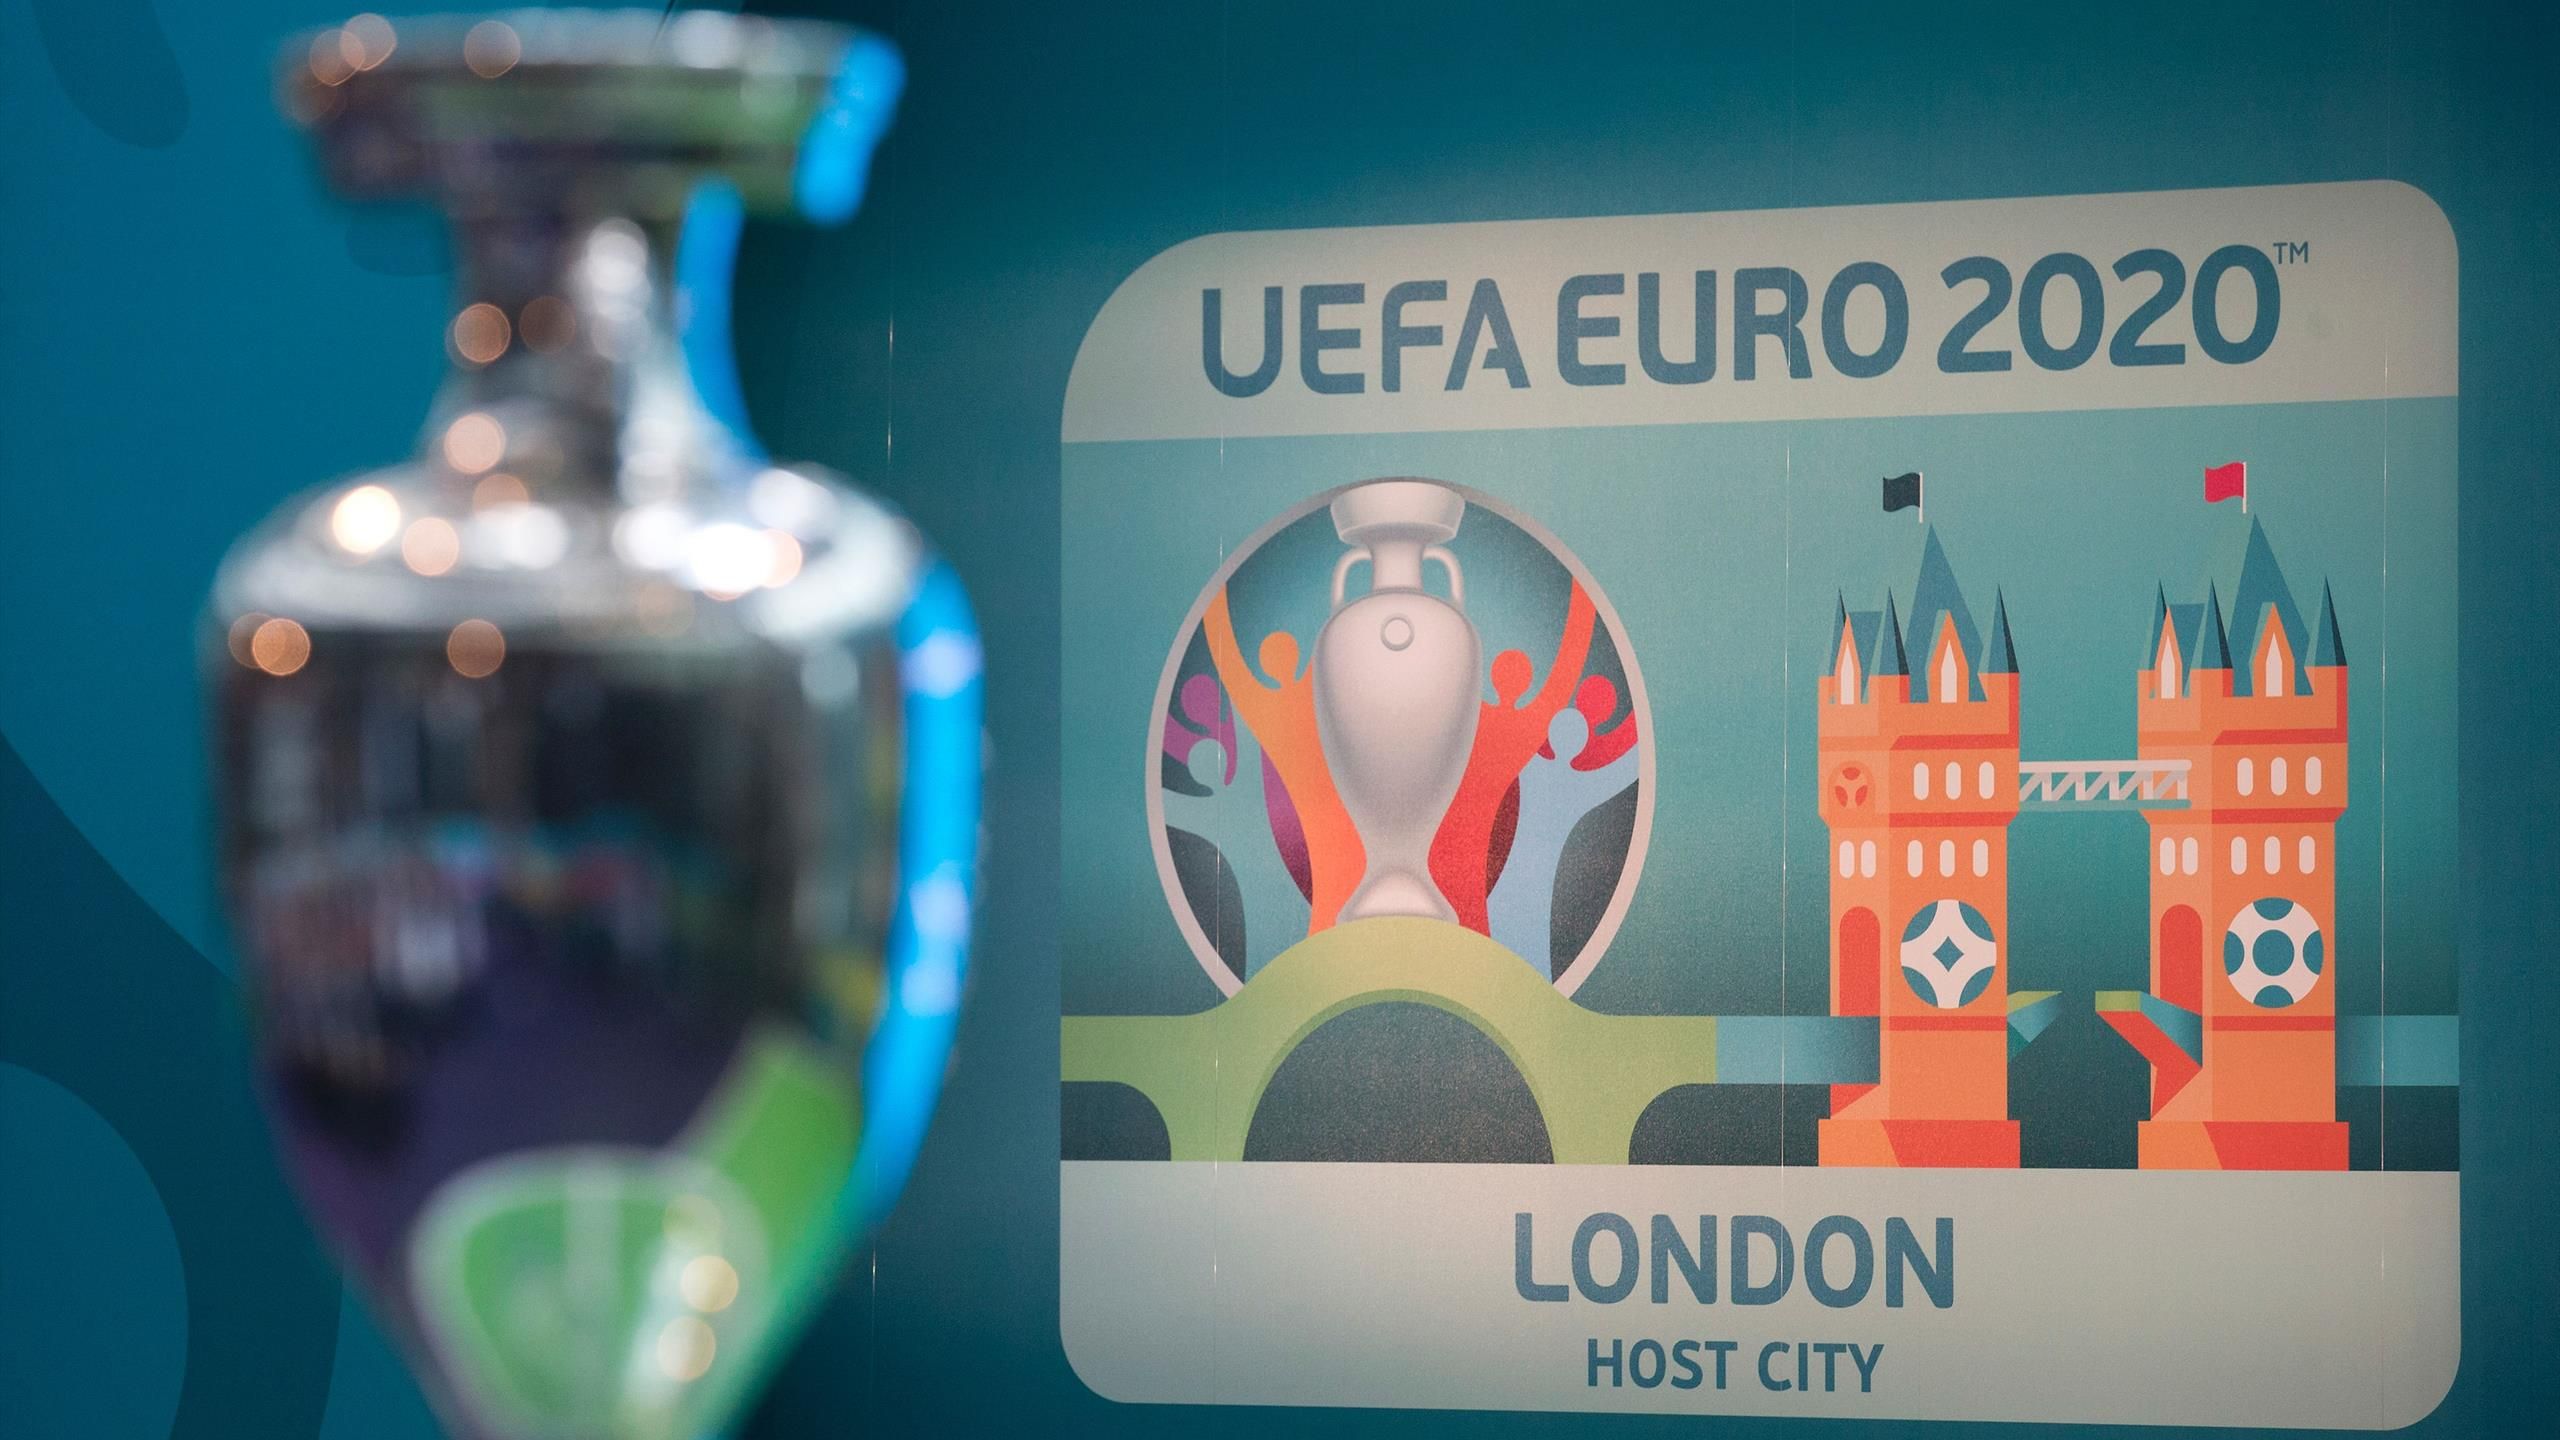 Euro 2020 in 2021: Full schedule, fixtures and groups, venues, odds, TV details and more